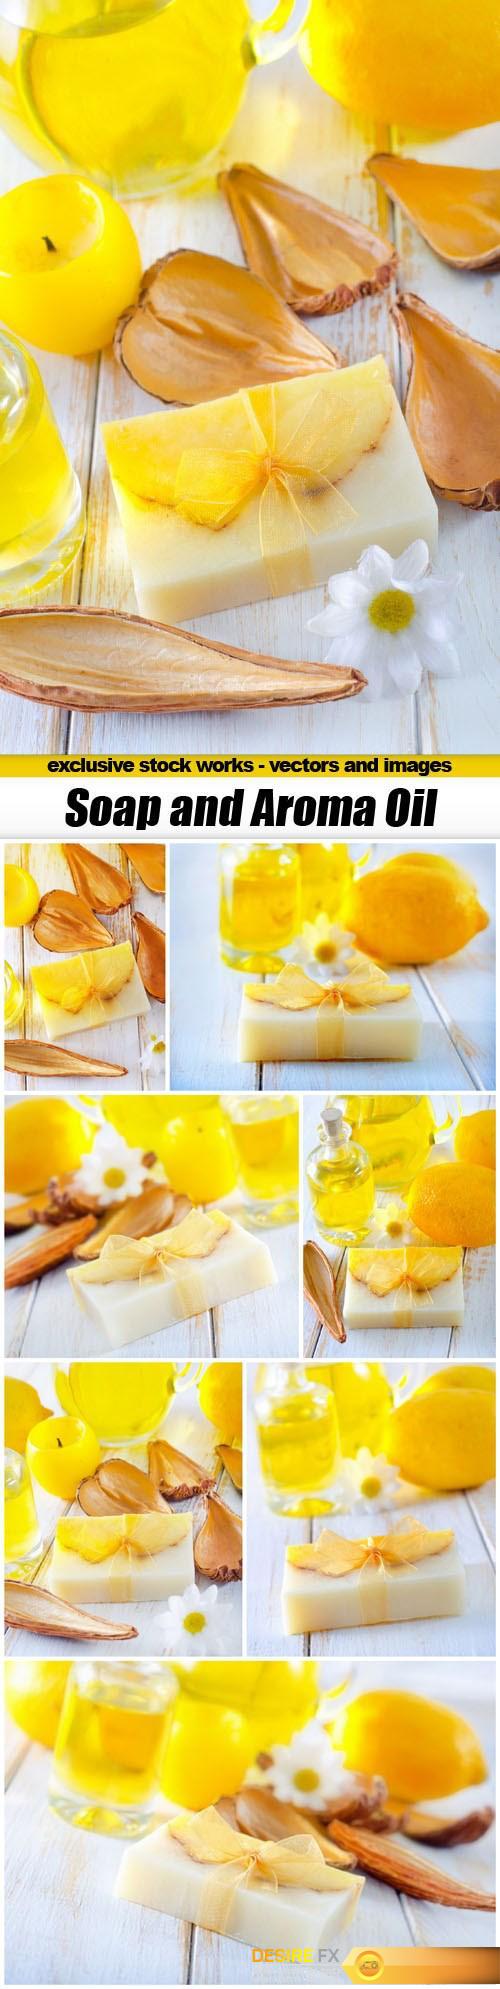 Soap and Aroma Oil - 8xUHQ JPEG